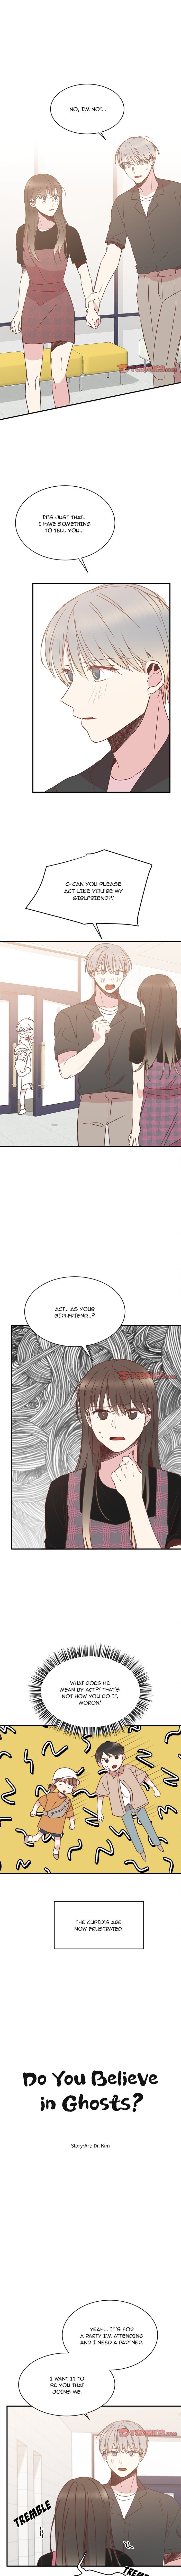 Do You Believe in Ghosts? - Chapter 34 Page 1